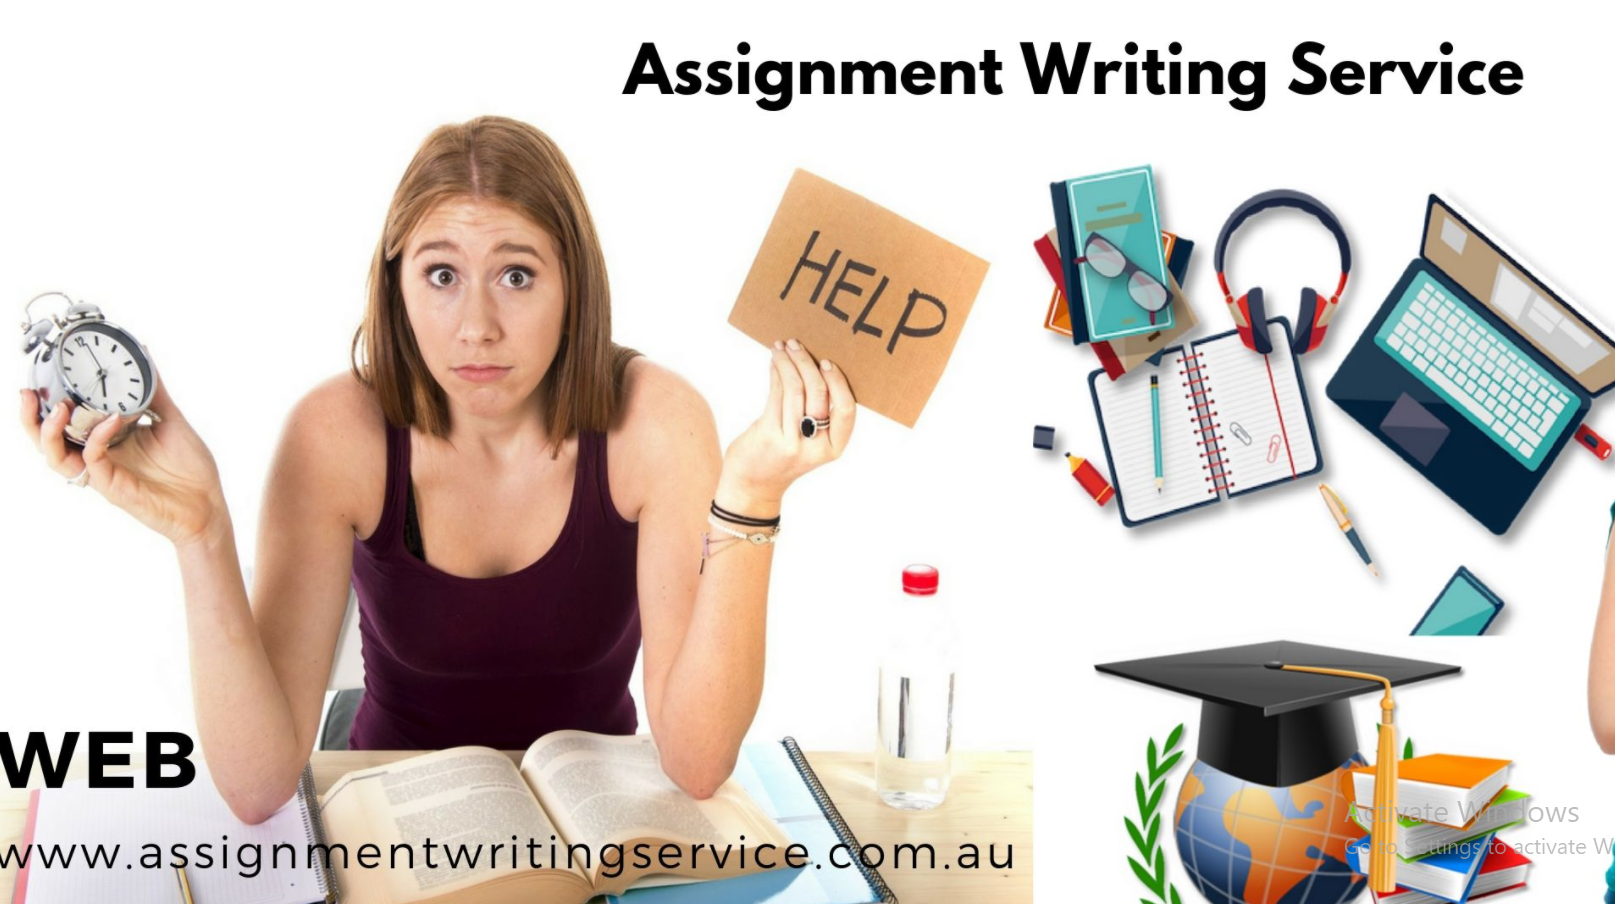 How to Choose an Assignment Writing Service